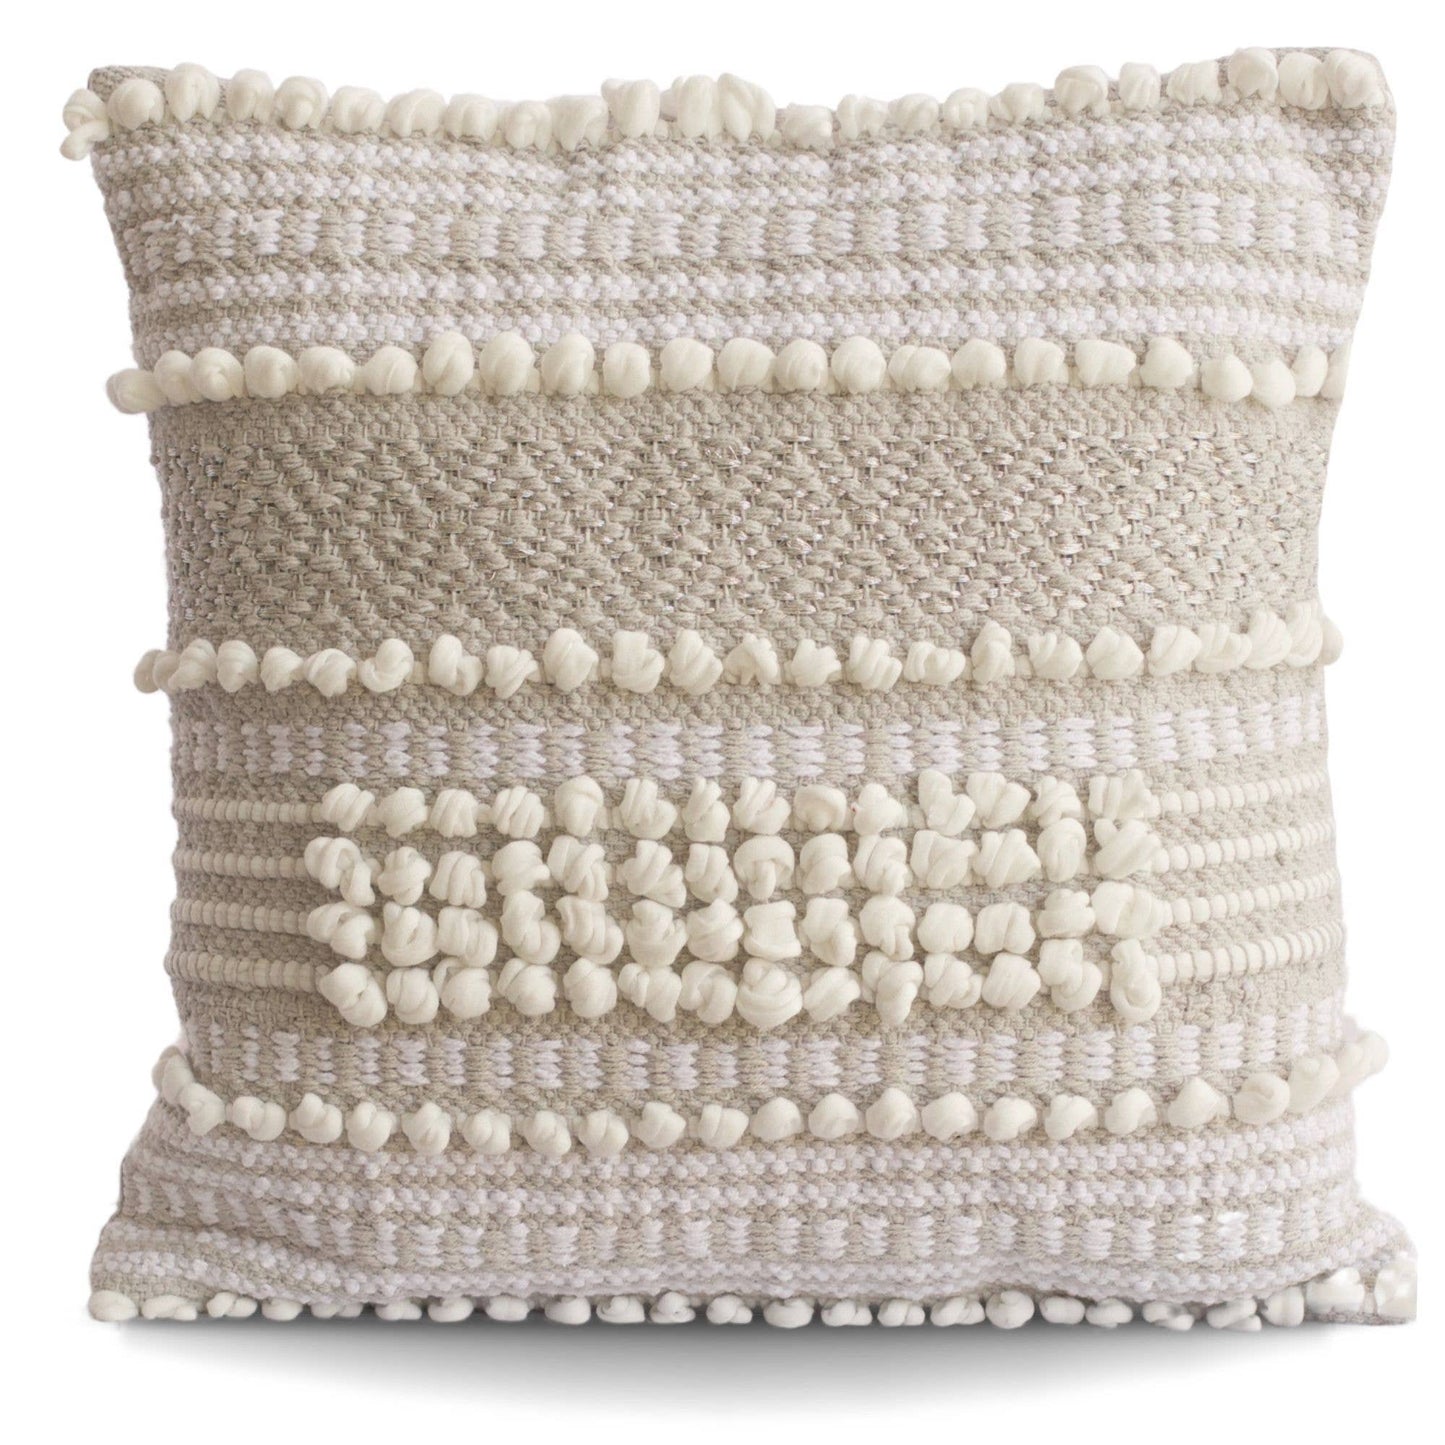 Moroccan Wedding Pillow Cover - Jo’s Vintage Werks